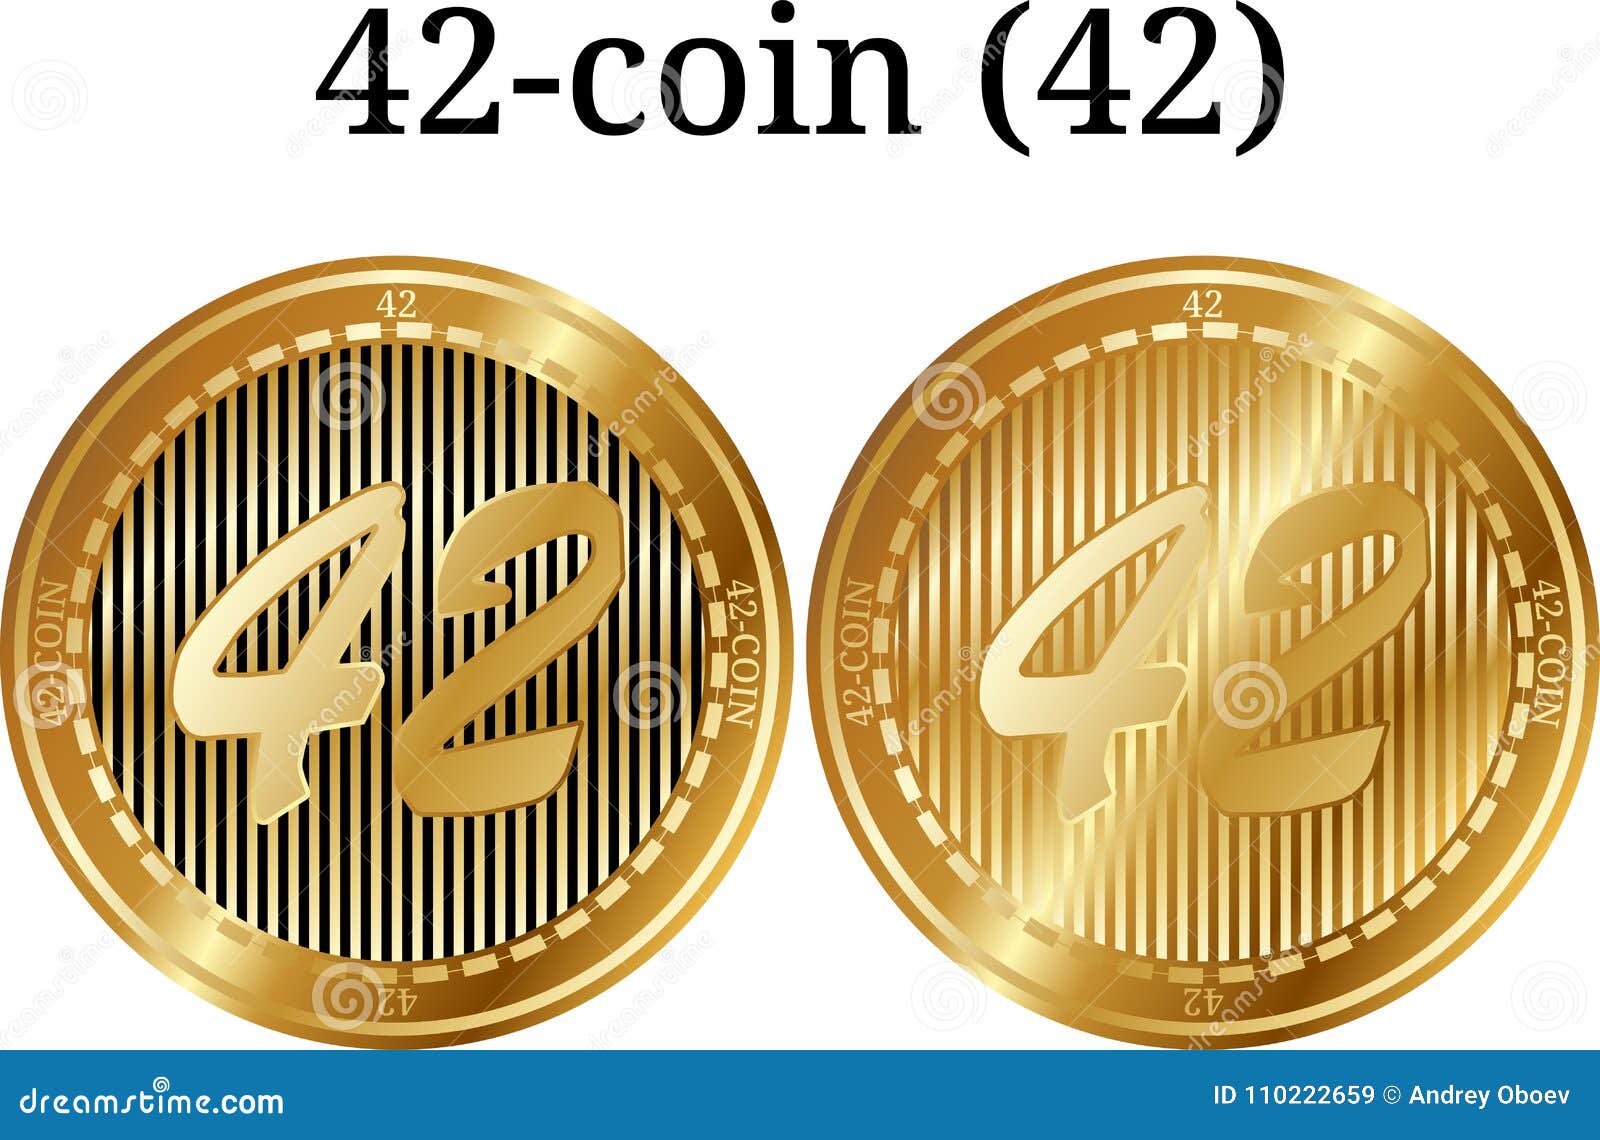 42coin cryptocurrency